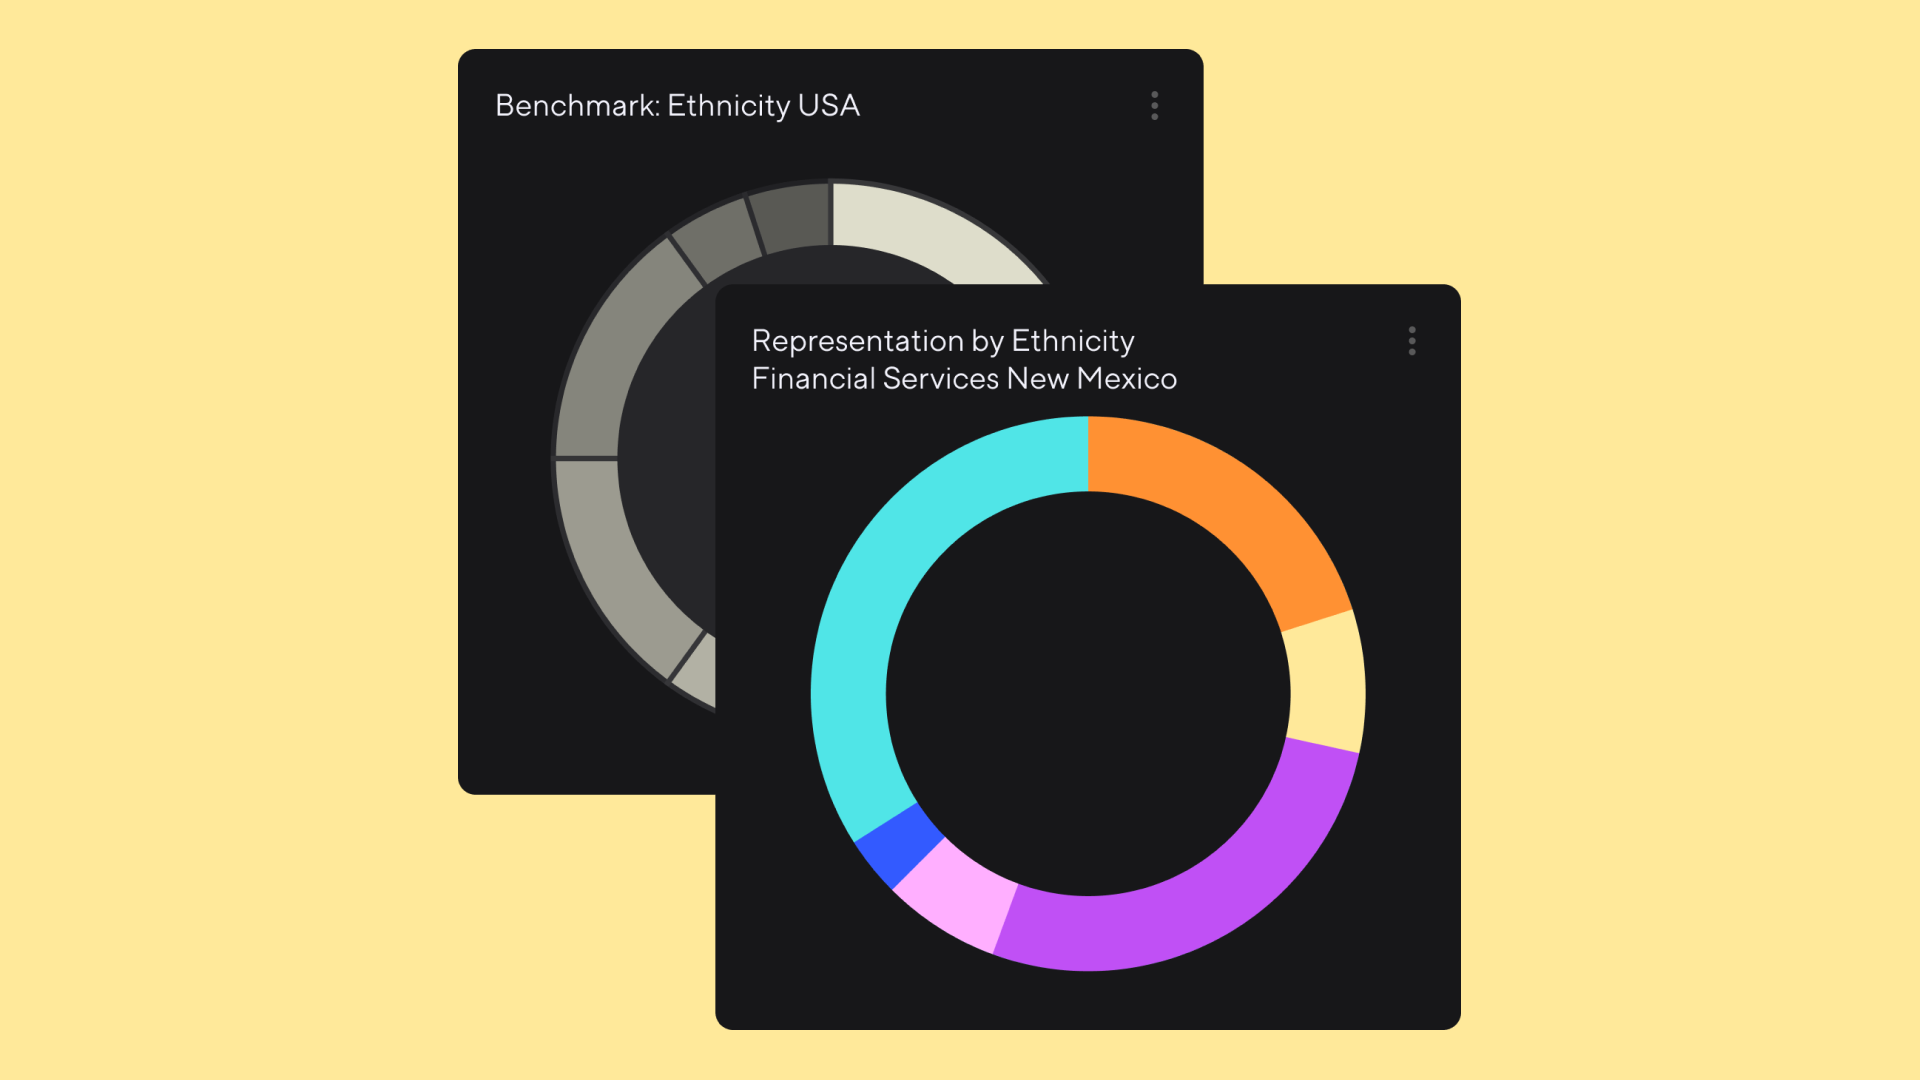 Two overlaid donut graphs. The chart in the background, with graph segments in shades of gray, is titled Benchmark: Ethnicity USA. The chart in the foreground, with graph segments in a range of bright colors, is titled Representation by Ethnicity Financial Services New Mexico.